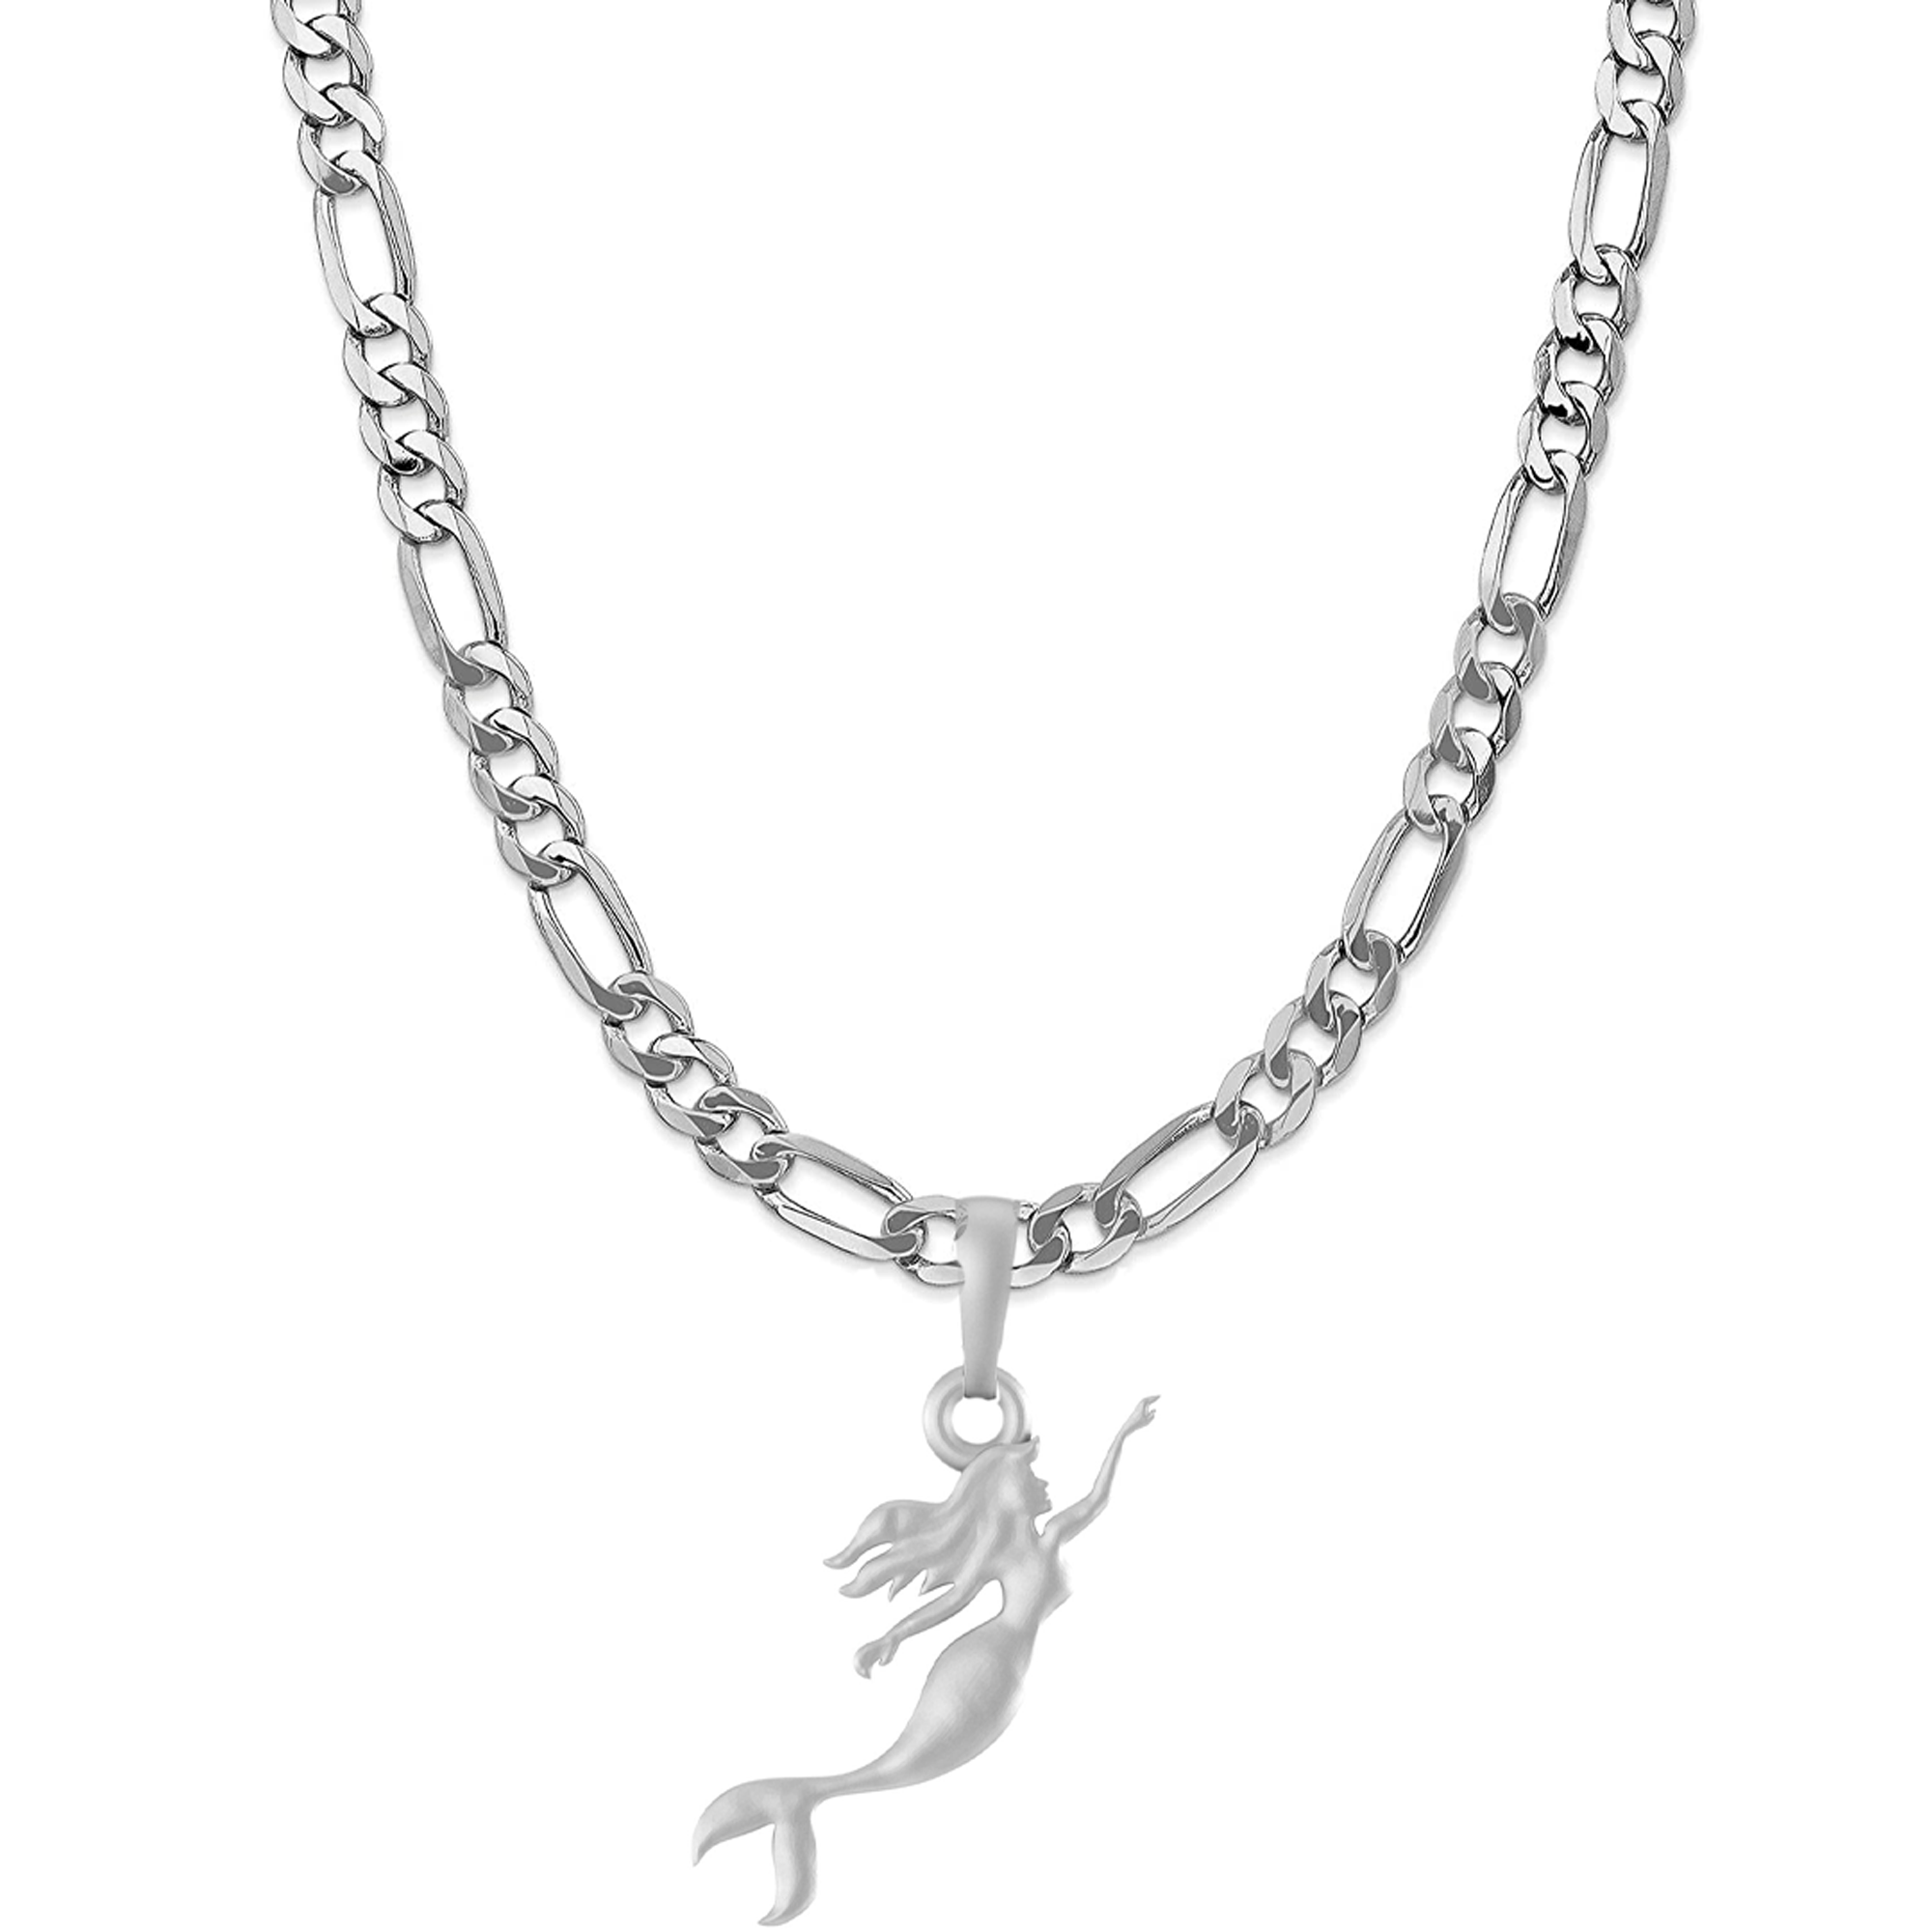 Akshat Sapphire Sterling Silver (92.5% purity) ambitious and Stylish divine Mermaid Chain Pendant  (Pendant with Figaro Chain-22 inches) for Men & Women Pure Silver Fashionable and gorgeous Mermaid Chain Locket for Happiness and joy